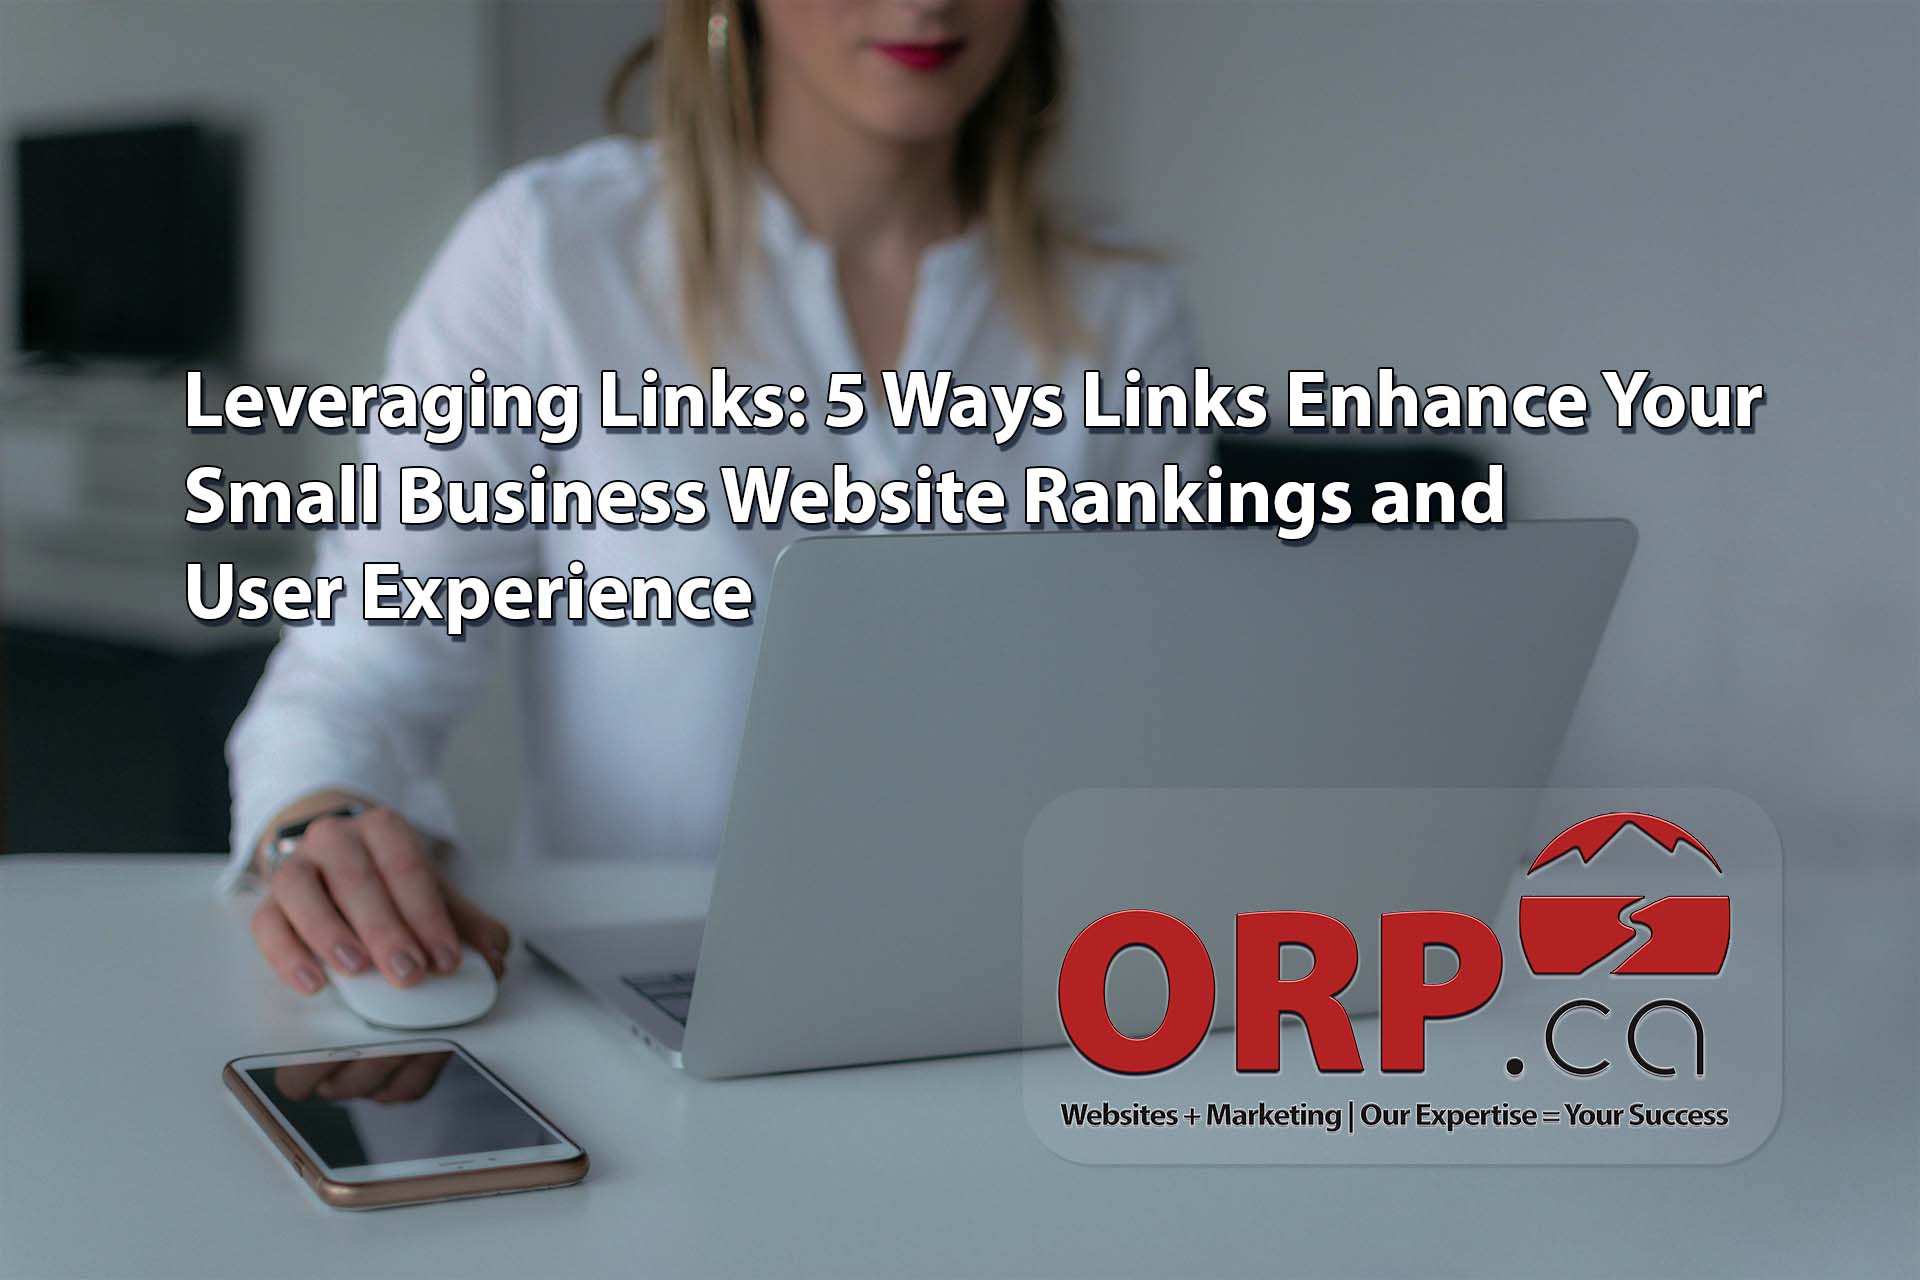 Leveraging Links 5 Ways They Enhance Small Business Website Rankings and User Experience  - a small business website digital marketing article from ORP.ca, Your Small Business Website and Digital Marketing Services Provider